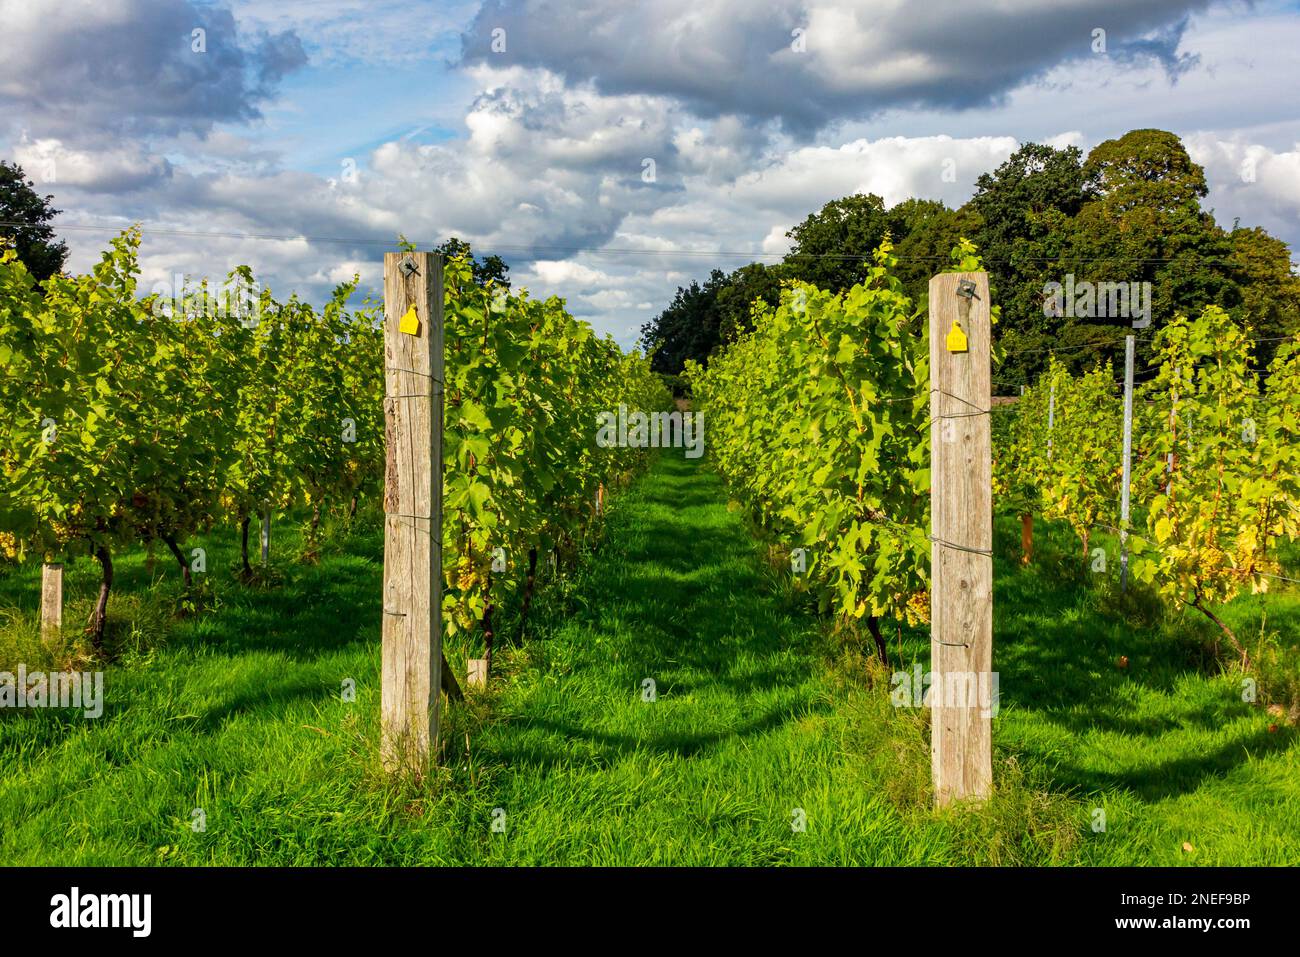 Rows of wine grapes growing in the vineyard at Renishaw Hall in north Derbyshire England UK. Stock Photo